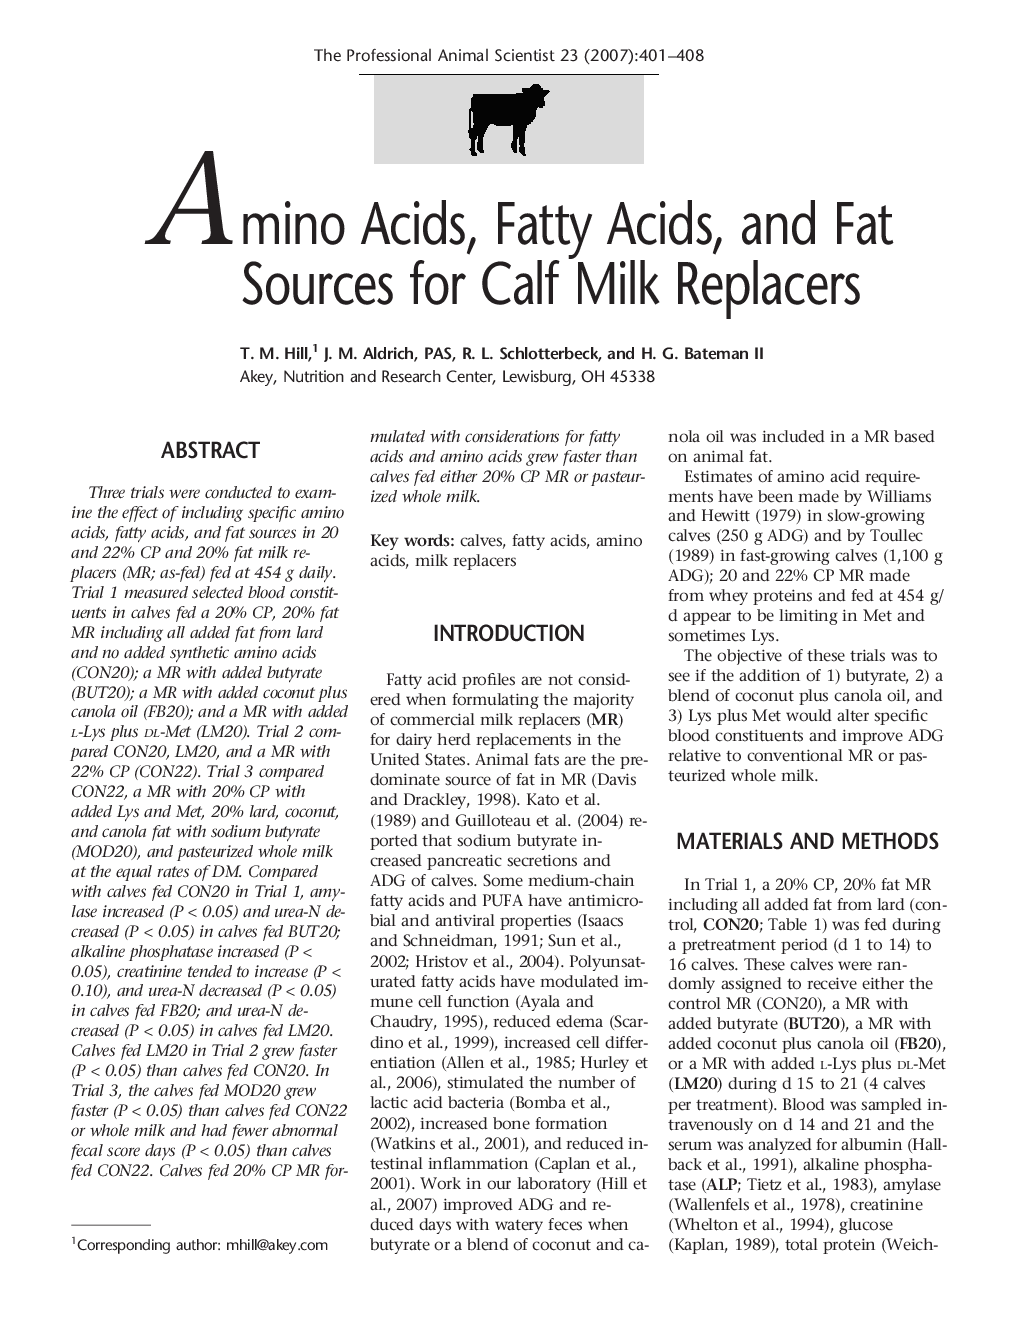 Amino Acids, Fatty Acids, and Fat Sources for Calf Milk Replacers